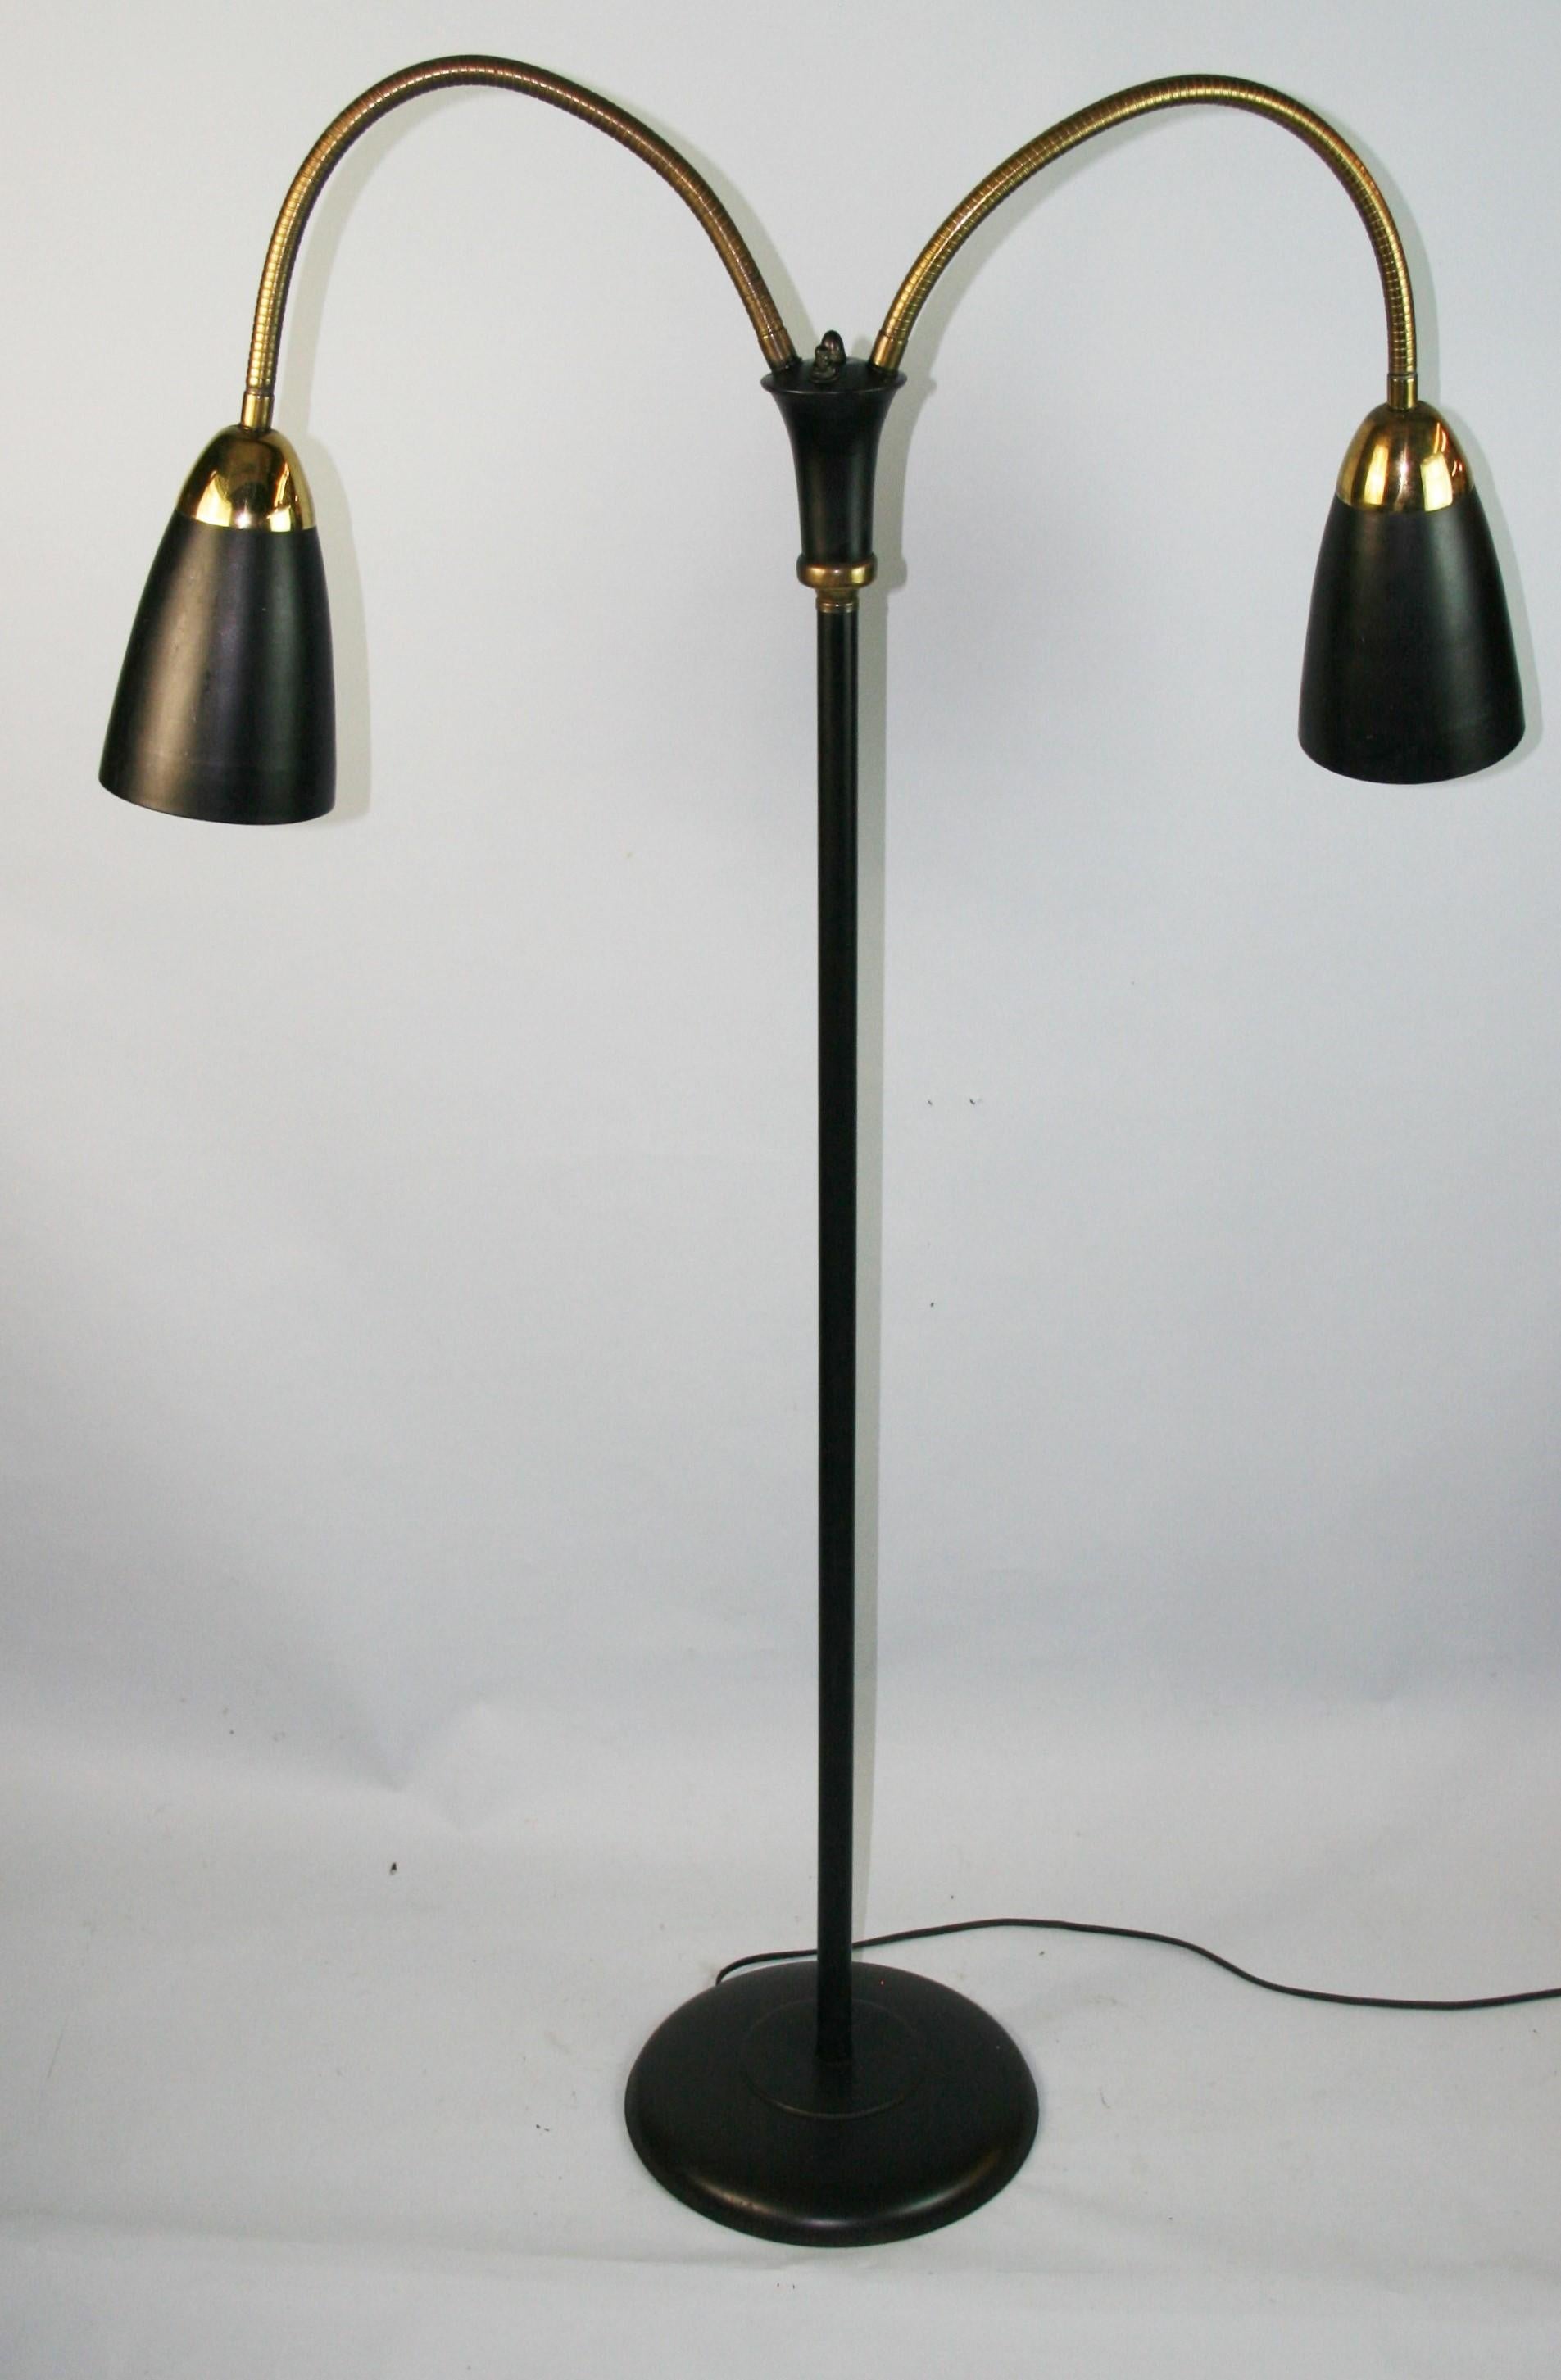 1363 Italian flexible floor lamp with built in two way switch
Existing wiring in working condition.